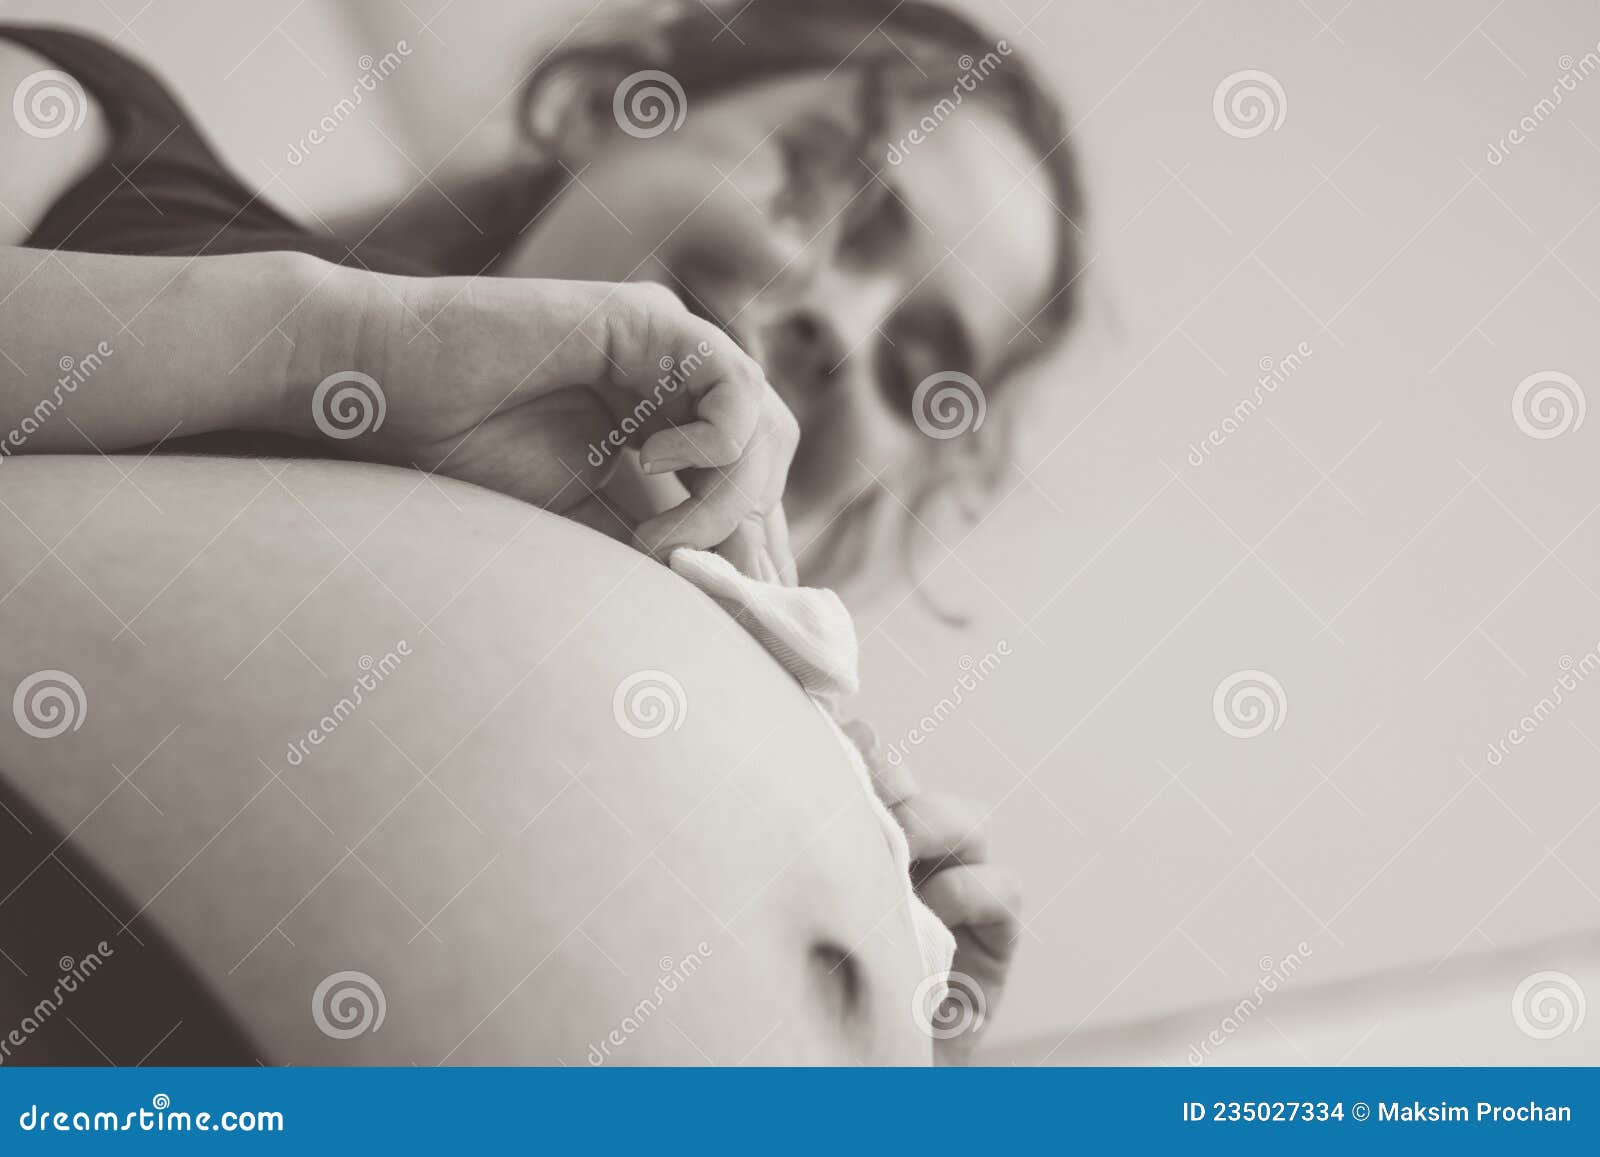 Touching Photo of Pregnancy Moments Young Expectant Mother with Socks on  Her Belly Stock Photo - Image of belly, expectant: 235027334